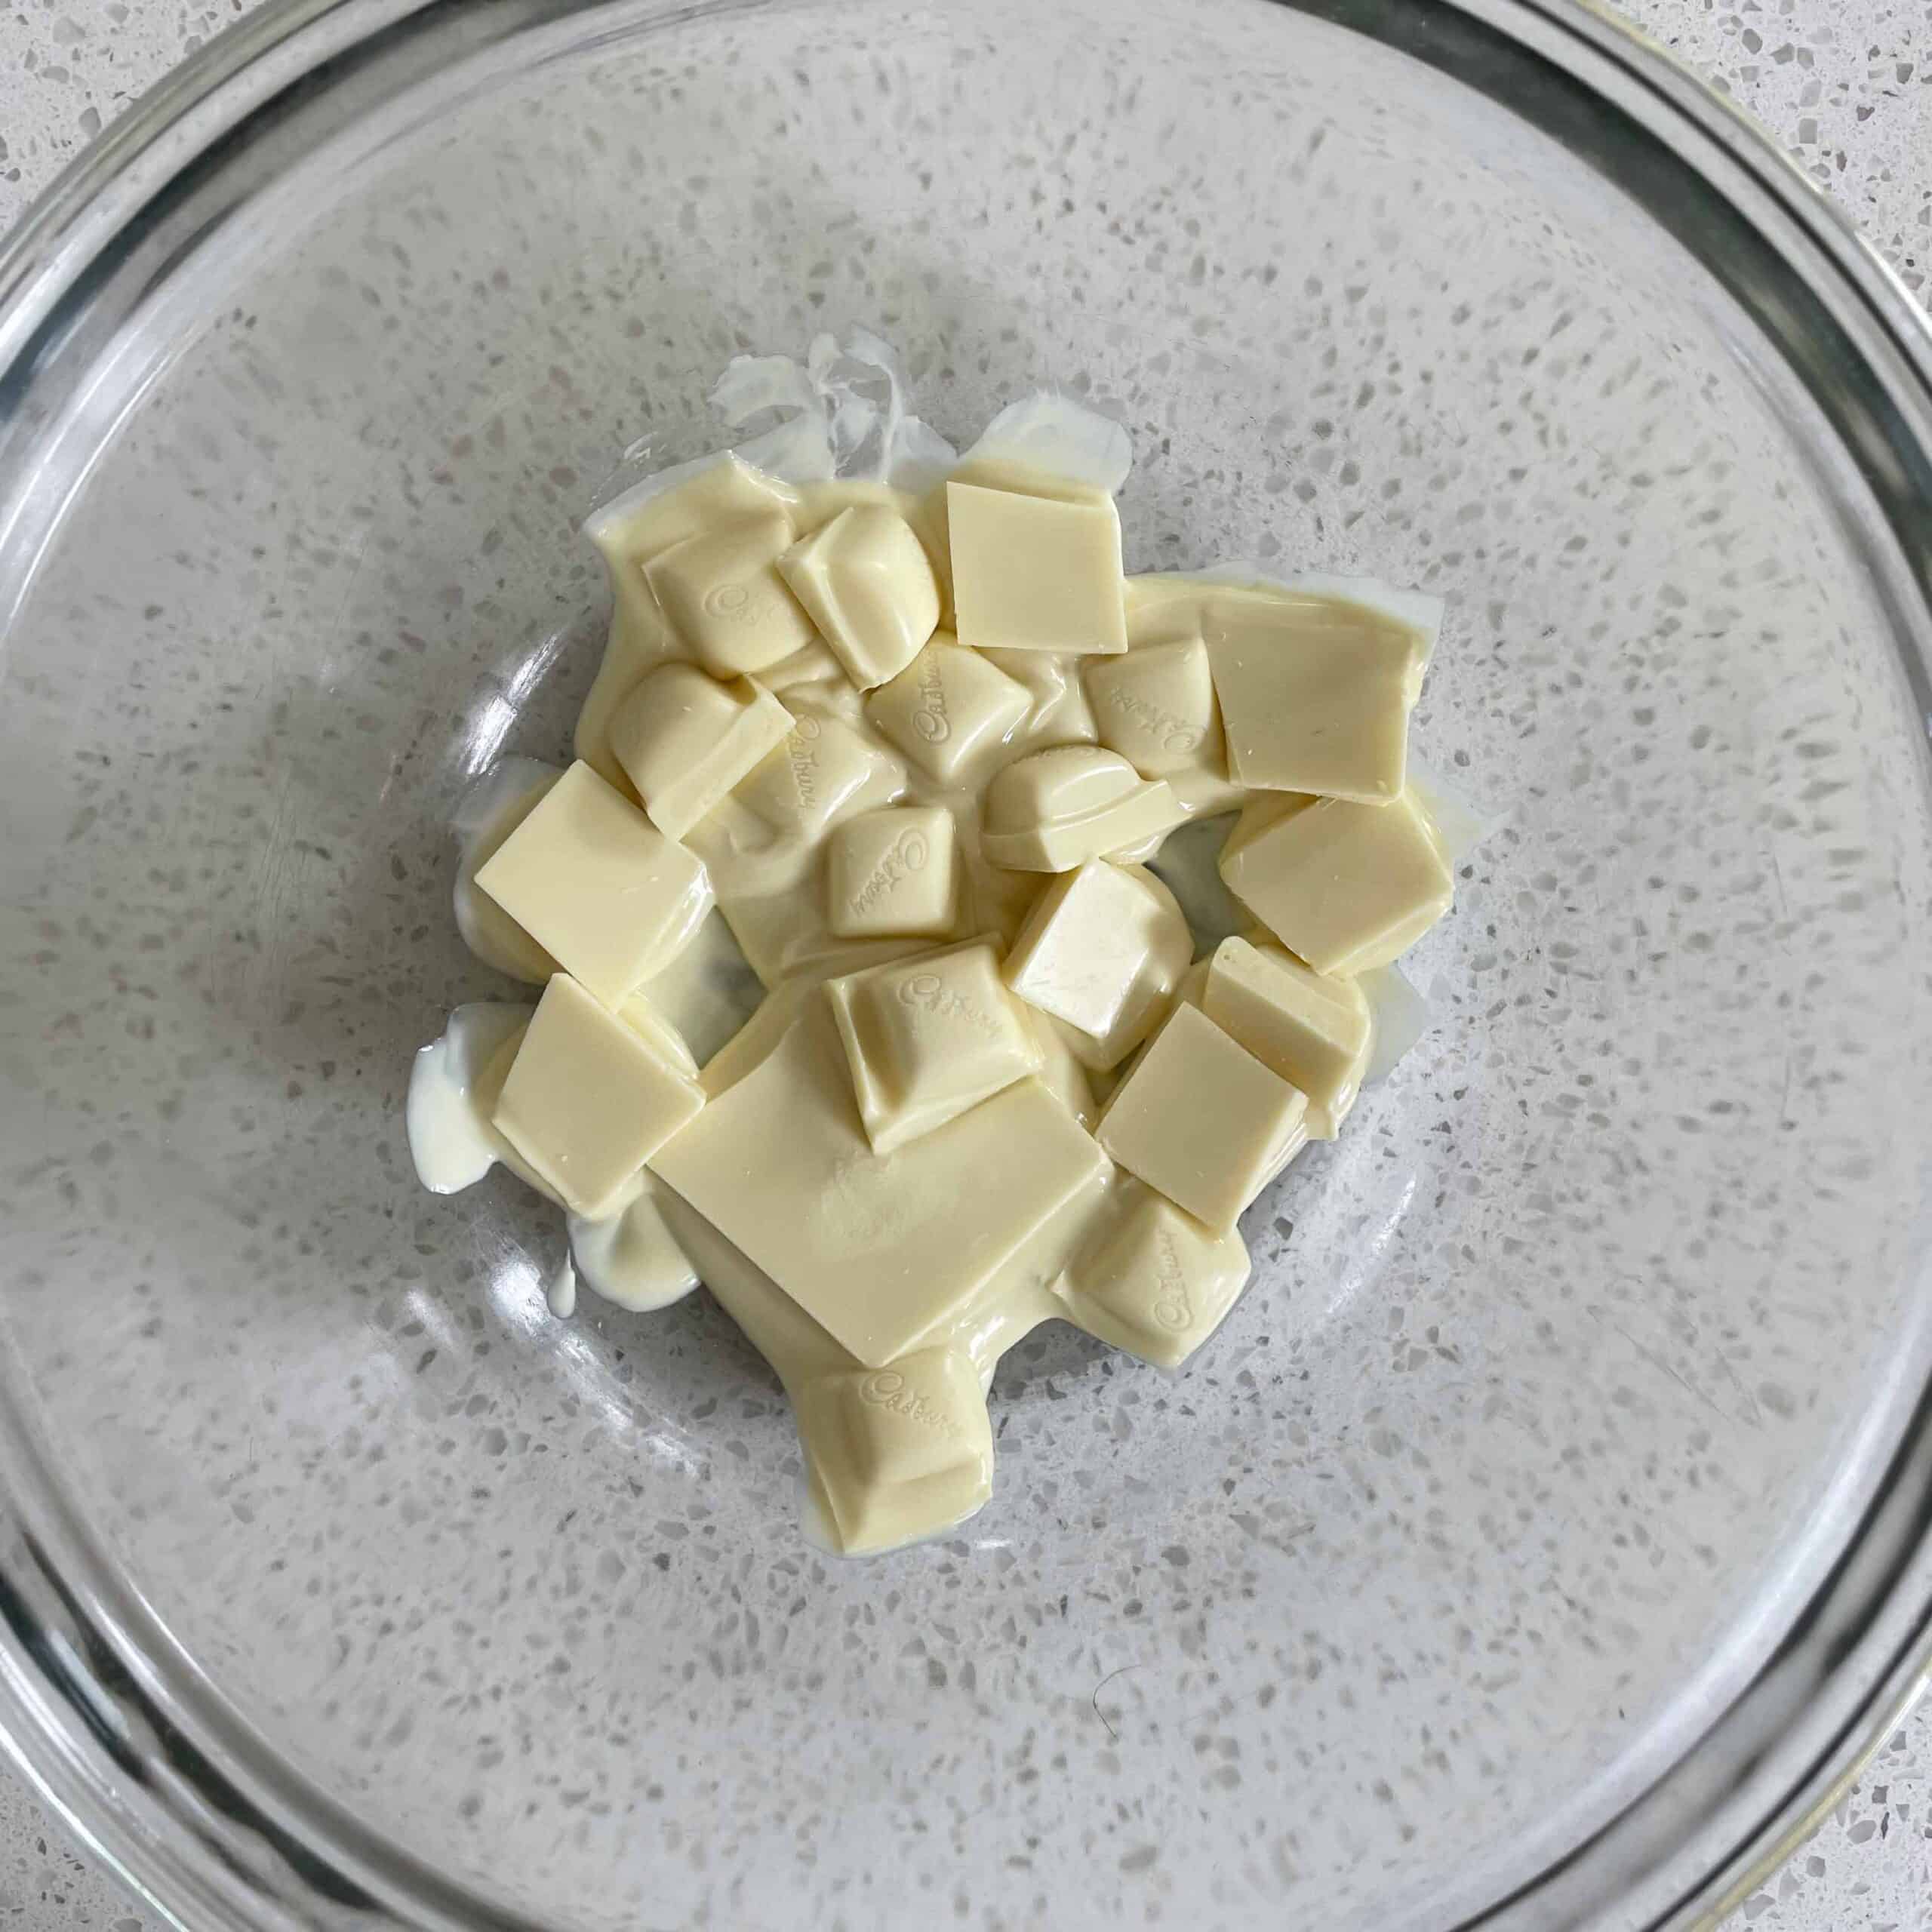 White chocolate melting in a bowl.